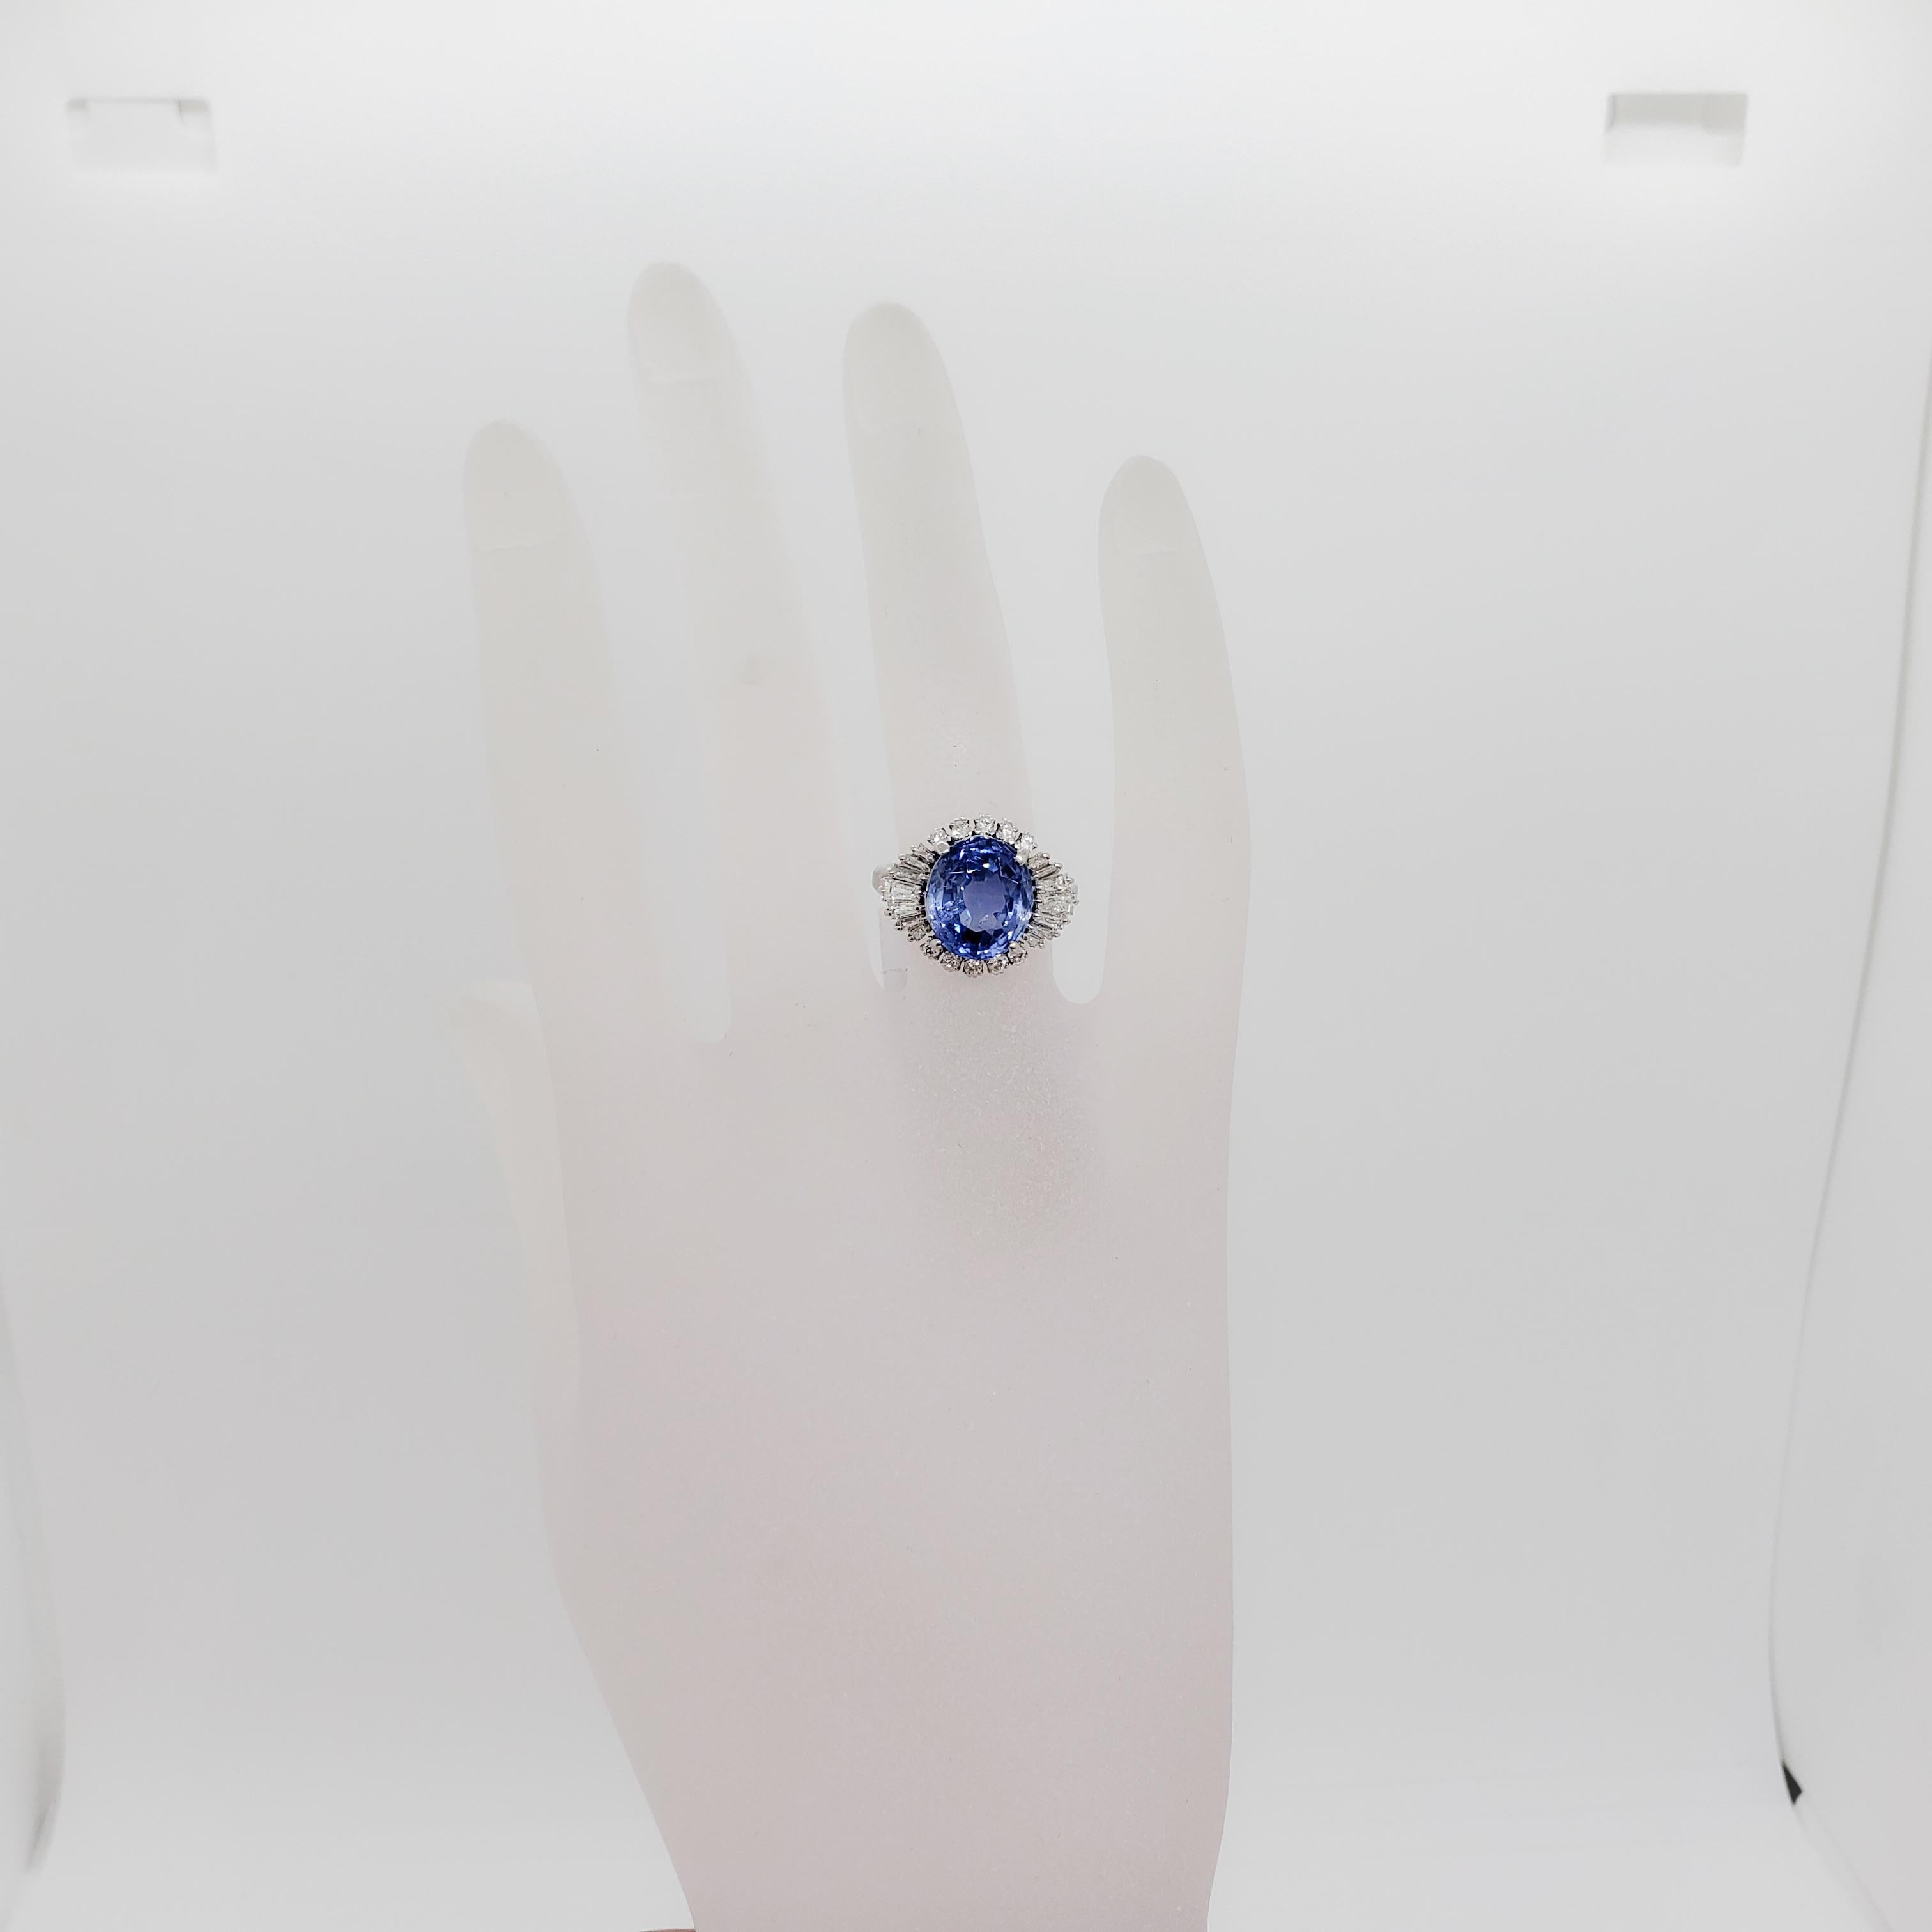 Gorgeous bright blue color 6.66 ct. Sri Lanka blue sapphire oval with 0.80 ct. of good quality, white, and bright diamond baguettes and rounds.  Handmade mounting in platinum.  Ring size 6.75.  Comes with GIA certificate.